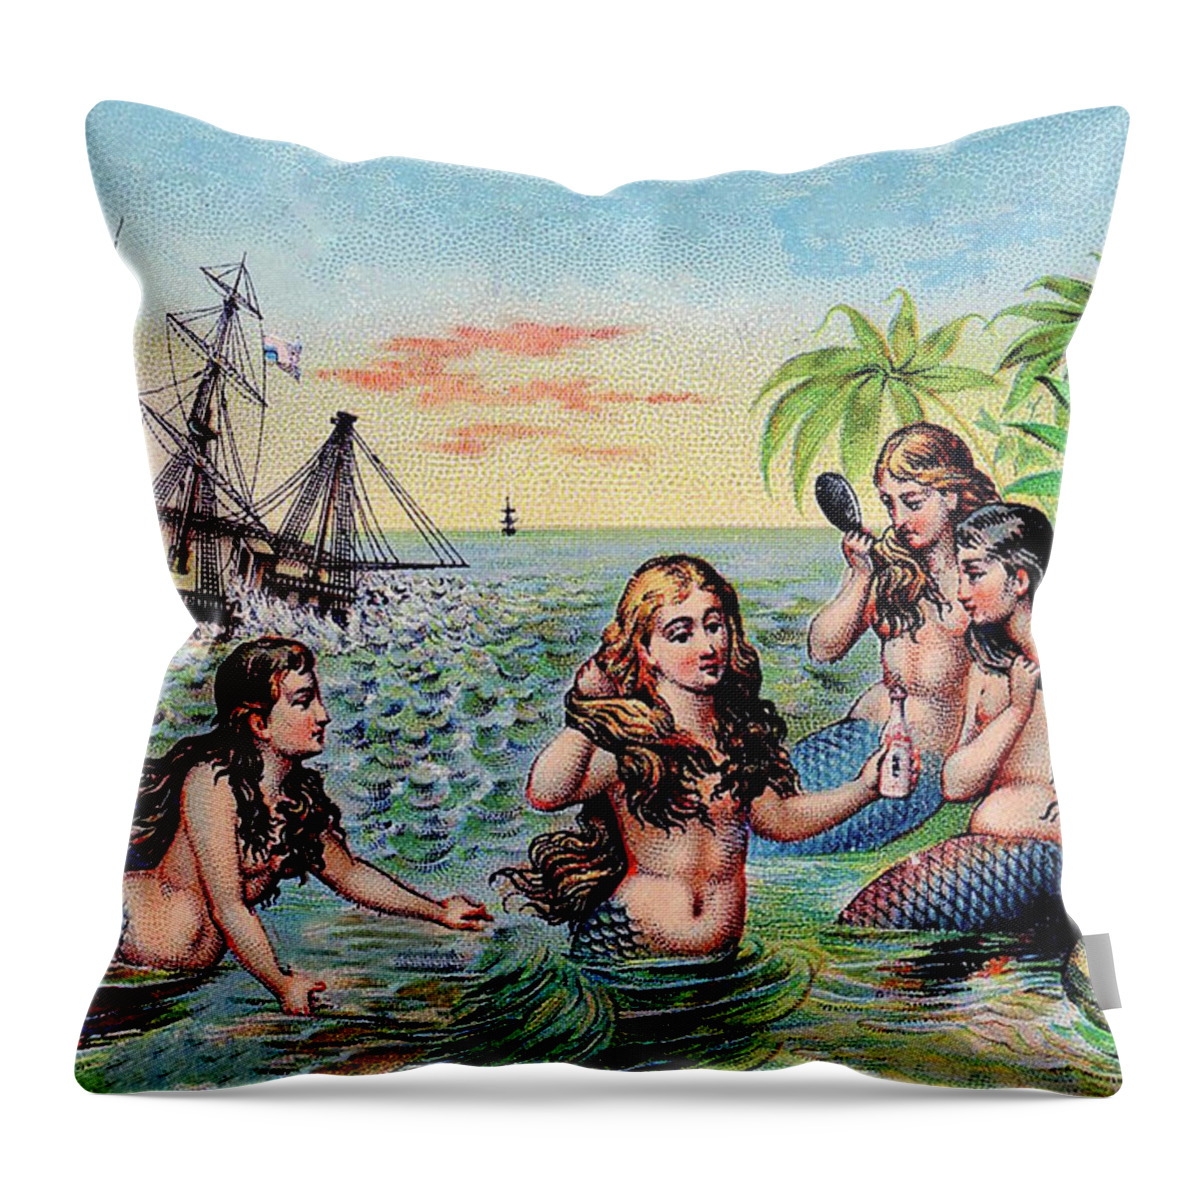 Mermaids Throw Pillow featuring the painting Vintage Mermaids and Schooner by Peggy Collins